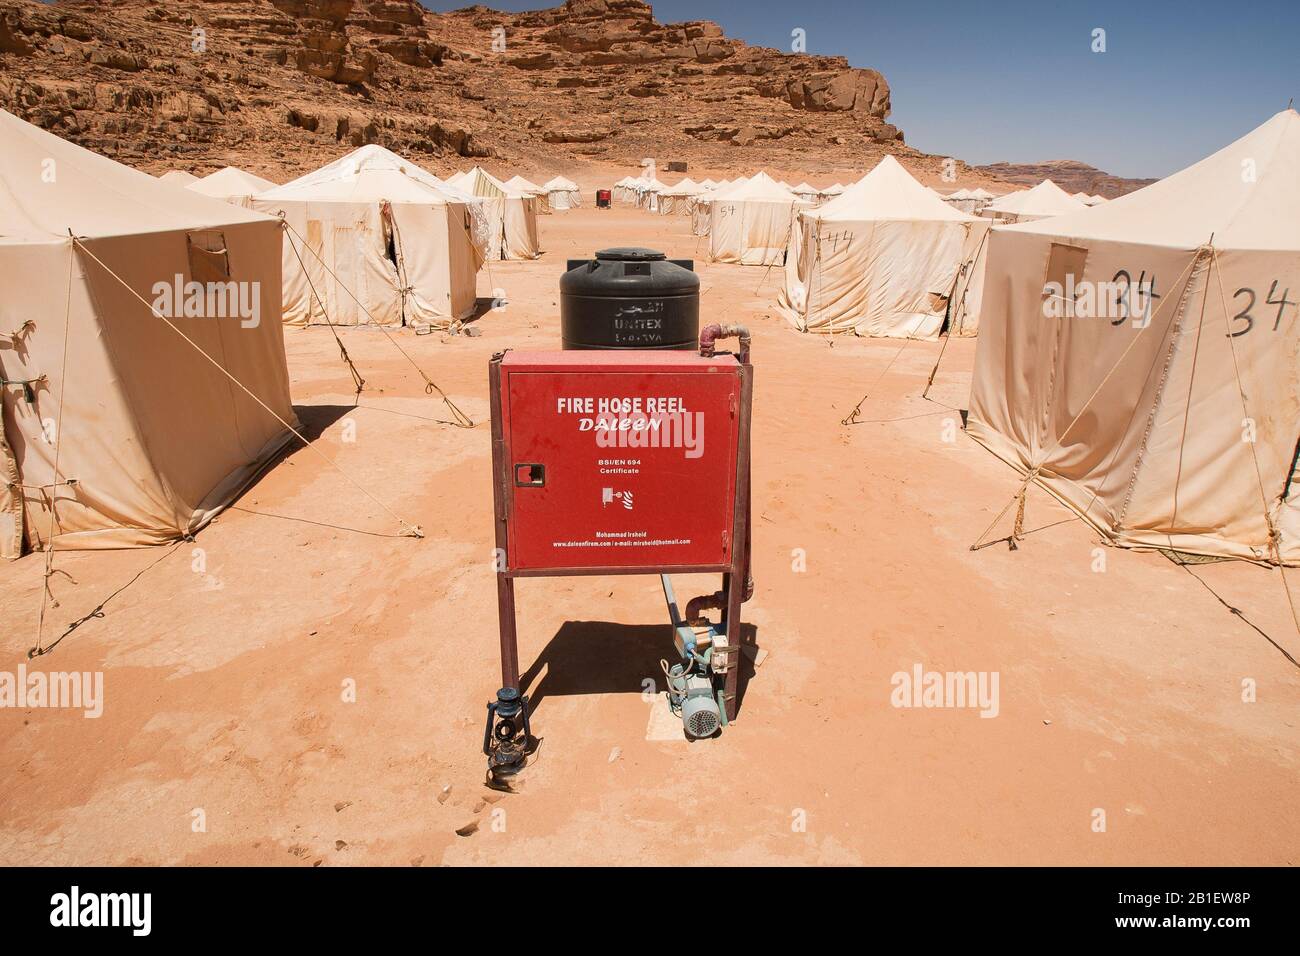 Wadi Rum, Jordan - April 28, 2009: A red fire hose reel locker and water tank attached stands between rows of tents at the Jabal Rum camp in Wadi Rum Stock Photo